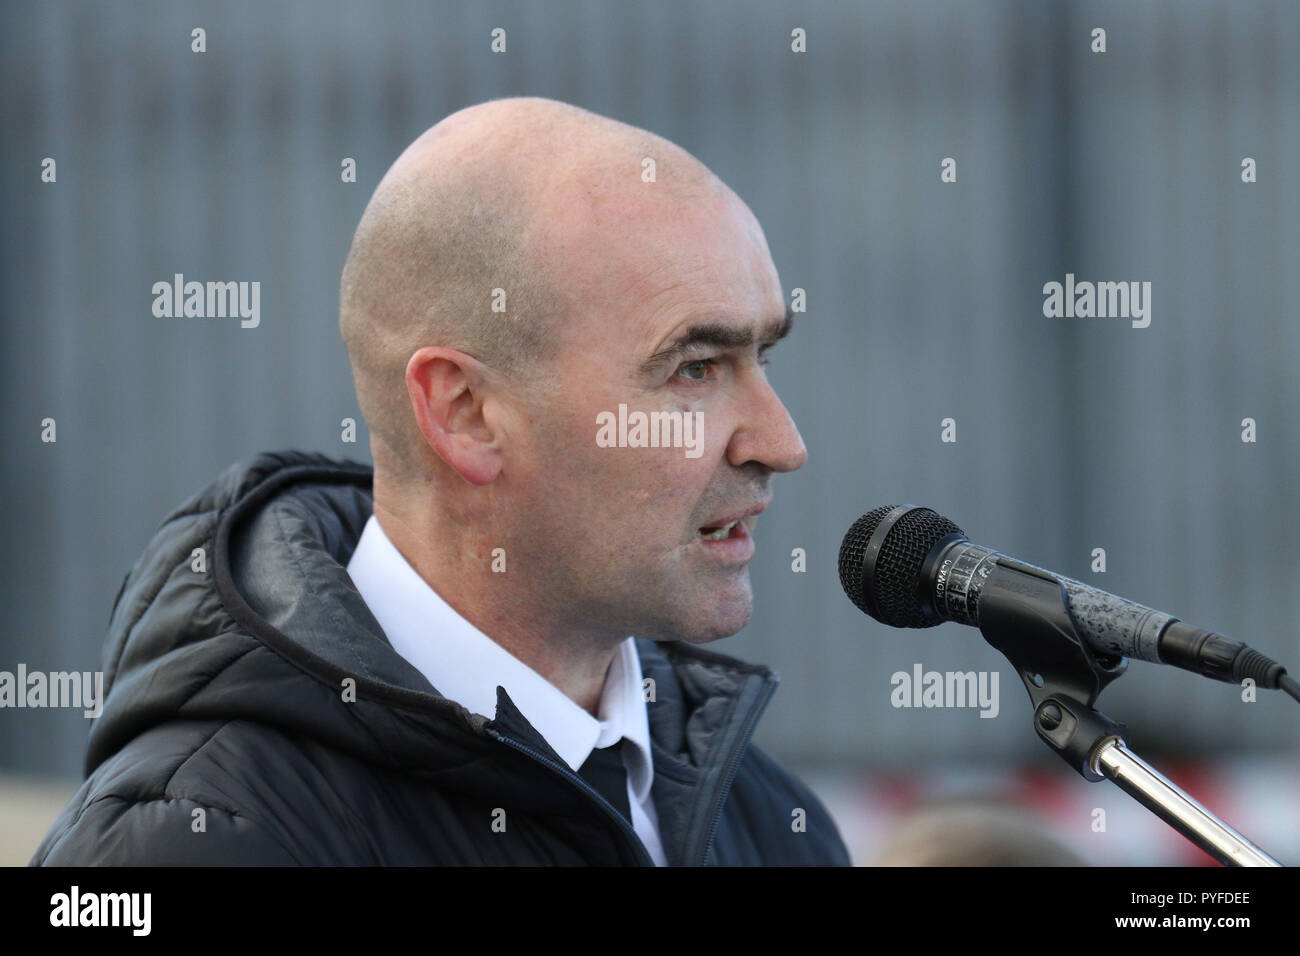 IRA killer Sean Kelly speaks during a controversial commemoration at Milltown Cemetery in west Belfast for his fellow Shankill Road bomber Thomas Begley, who died alongside the nine victims of the 1993 attack. Stock Photo